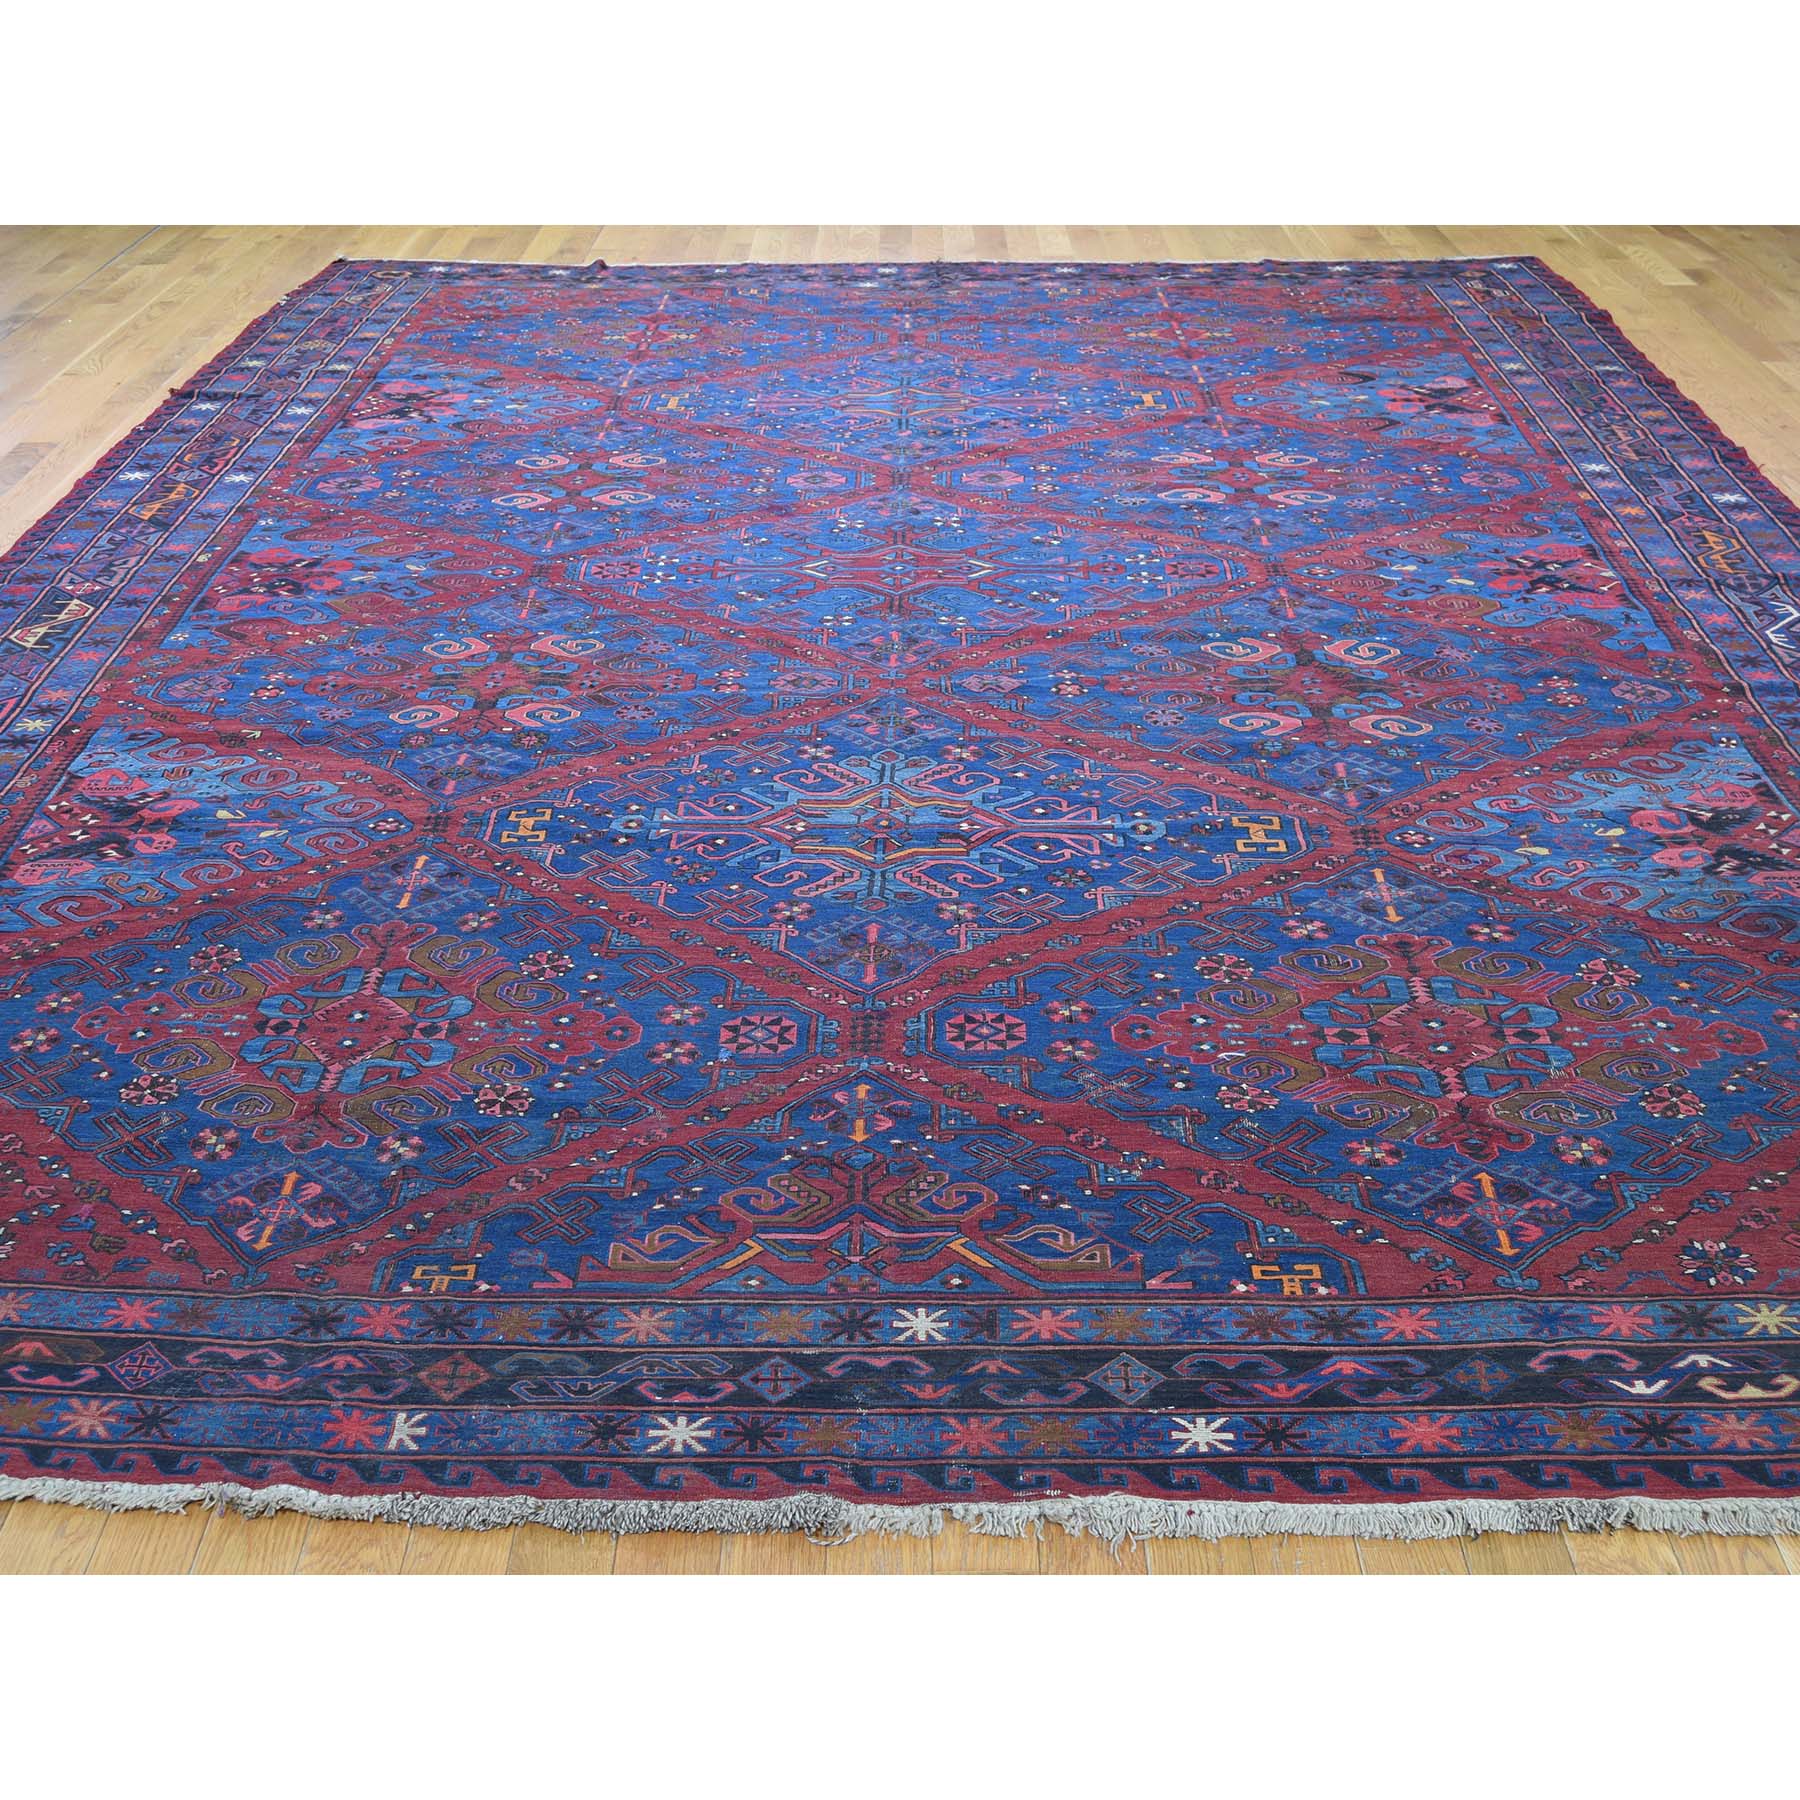 10-1 x13-7  Antique Caucasian Soumak Good Condition Pure Wool Hand-Knotted Oriental Rug 